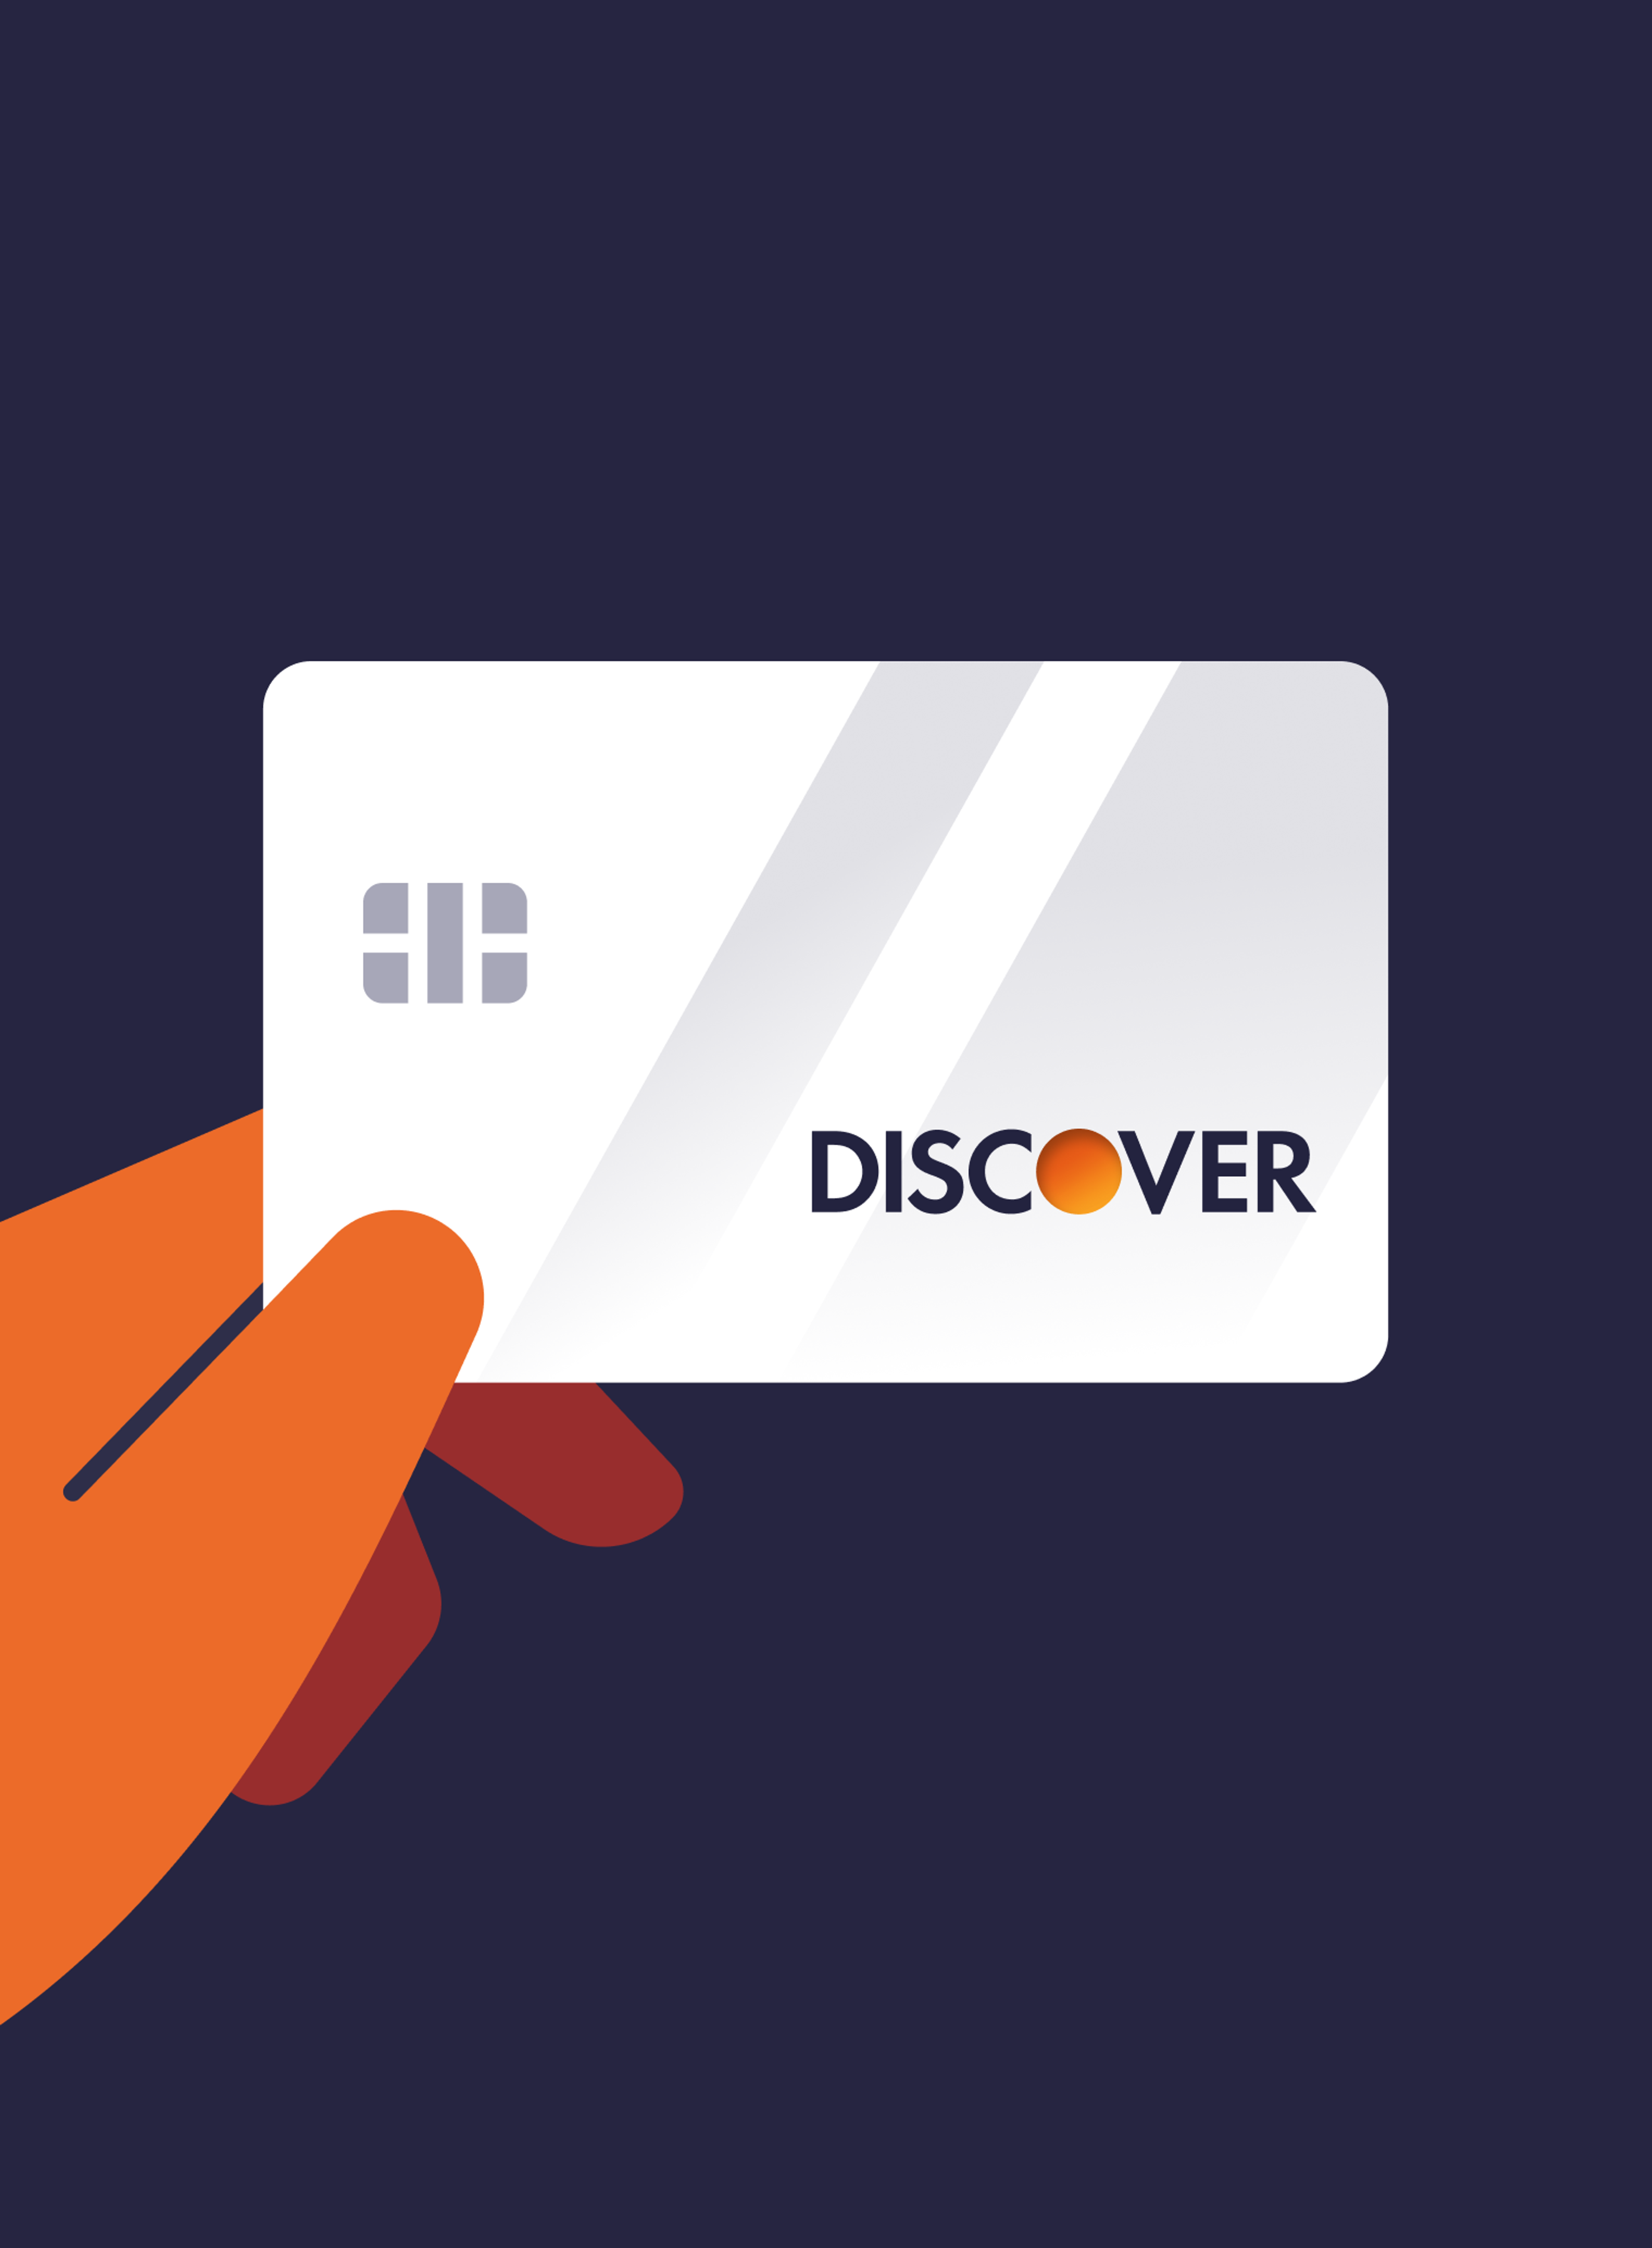 Discover logo on a credit card